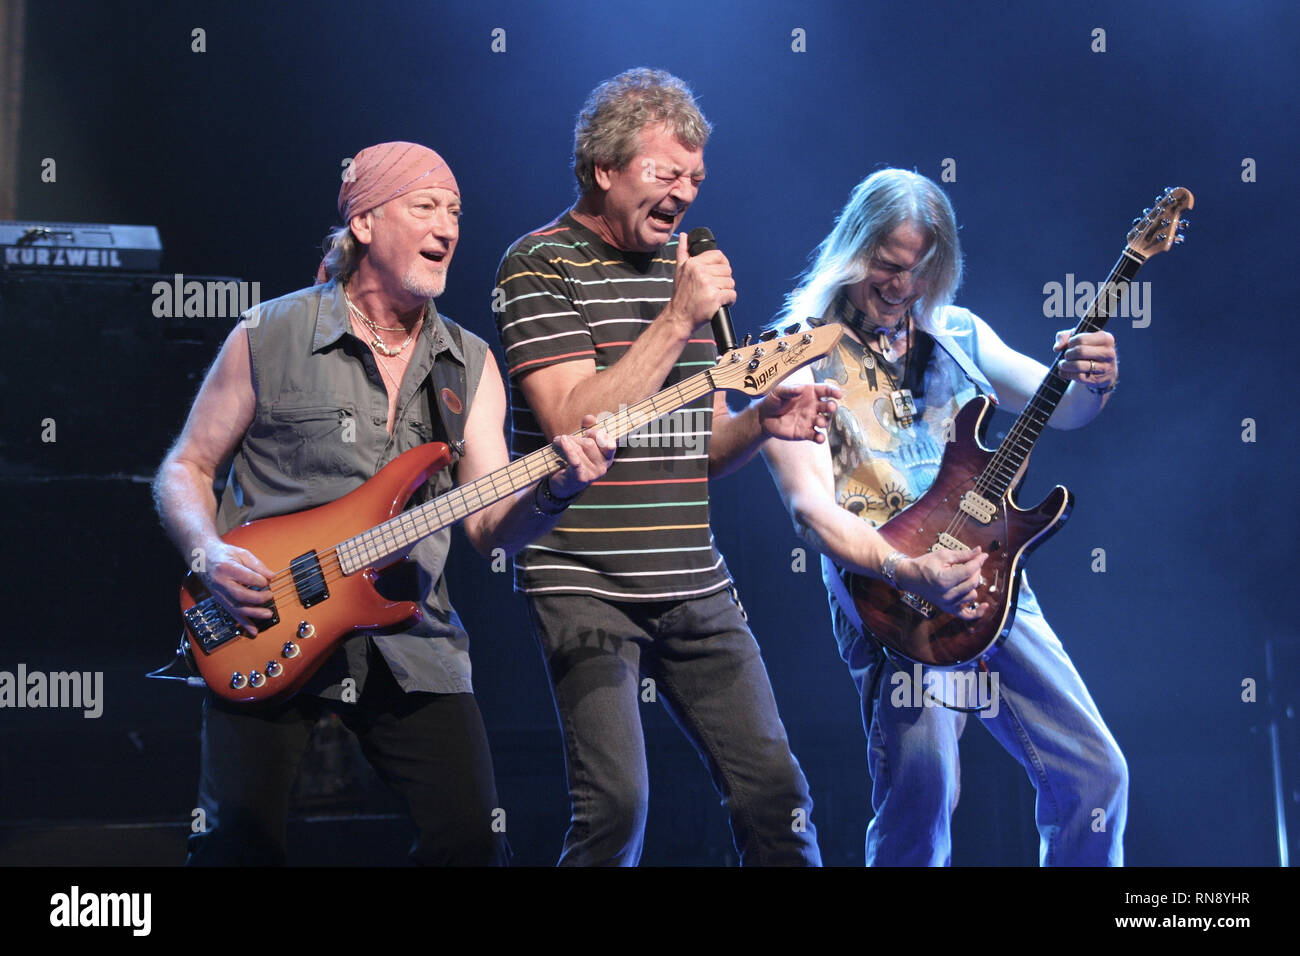 Deep Purple band members are shown performing together during a 'live' concert appearance. Stock Photo